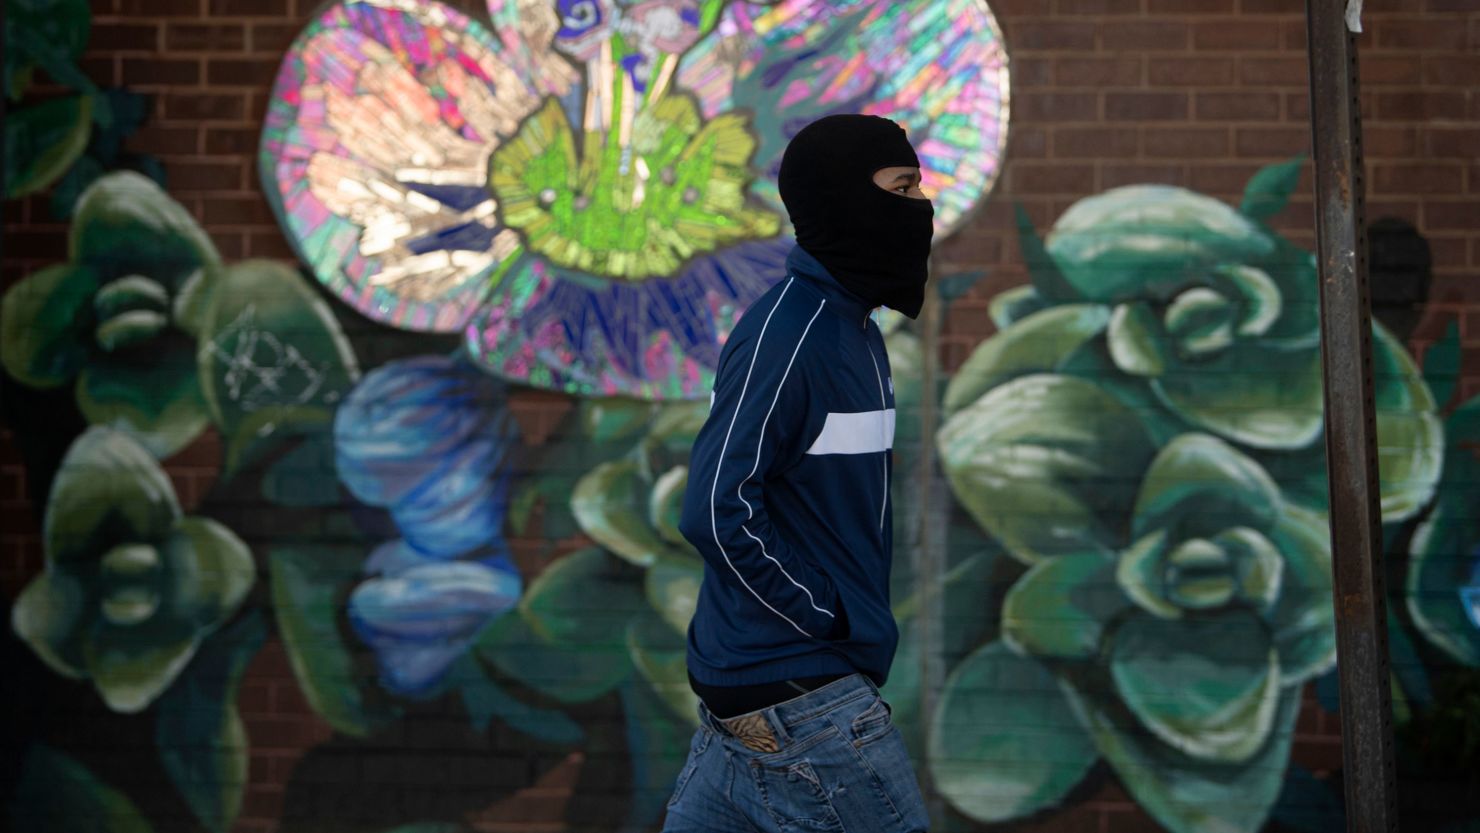 Philadelphia city council votes to permanently ban wearing wearing ski masks  in public